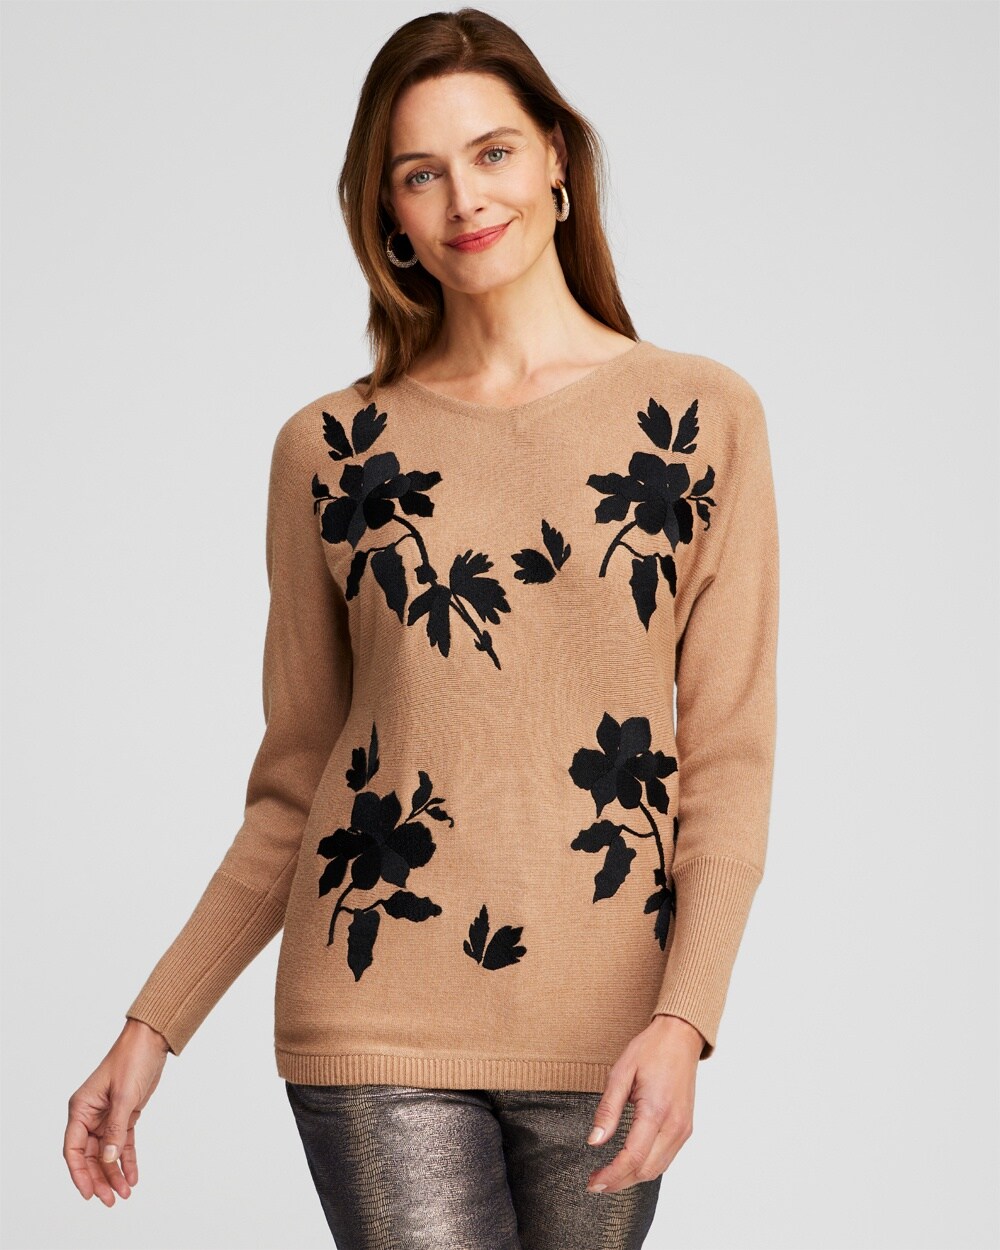 Floral Embroidered Pullover Sweater video preview image, click to start video